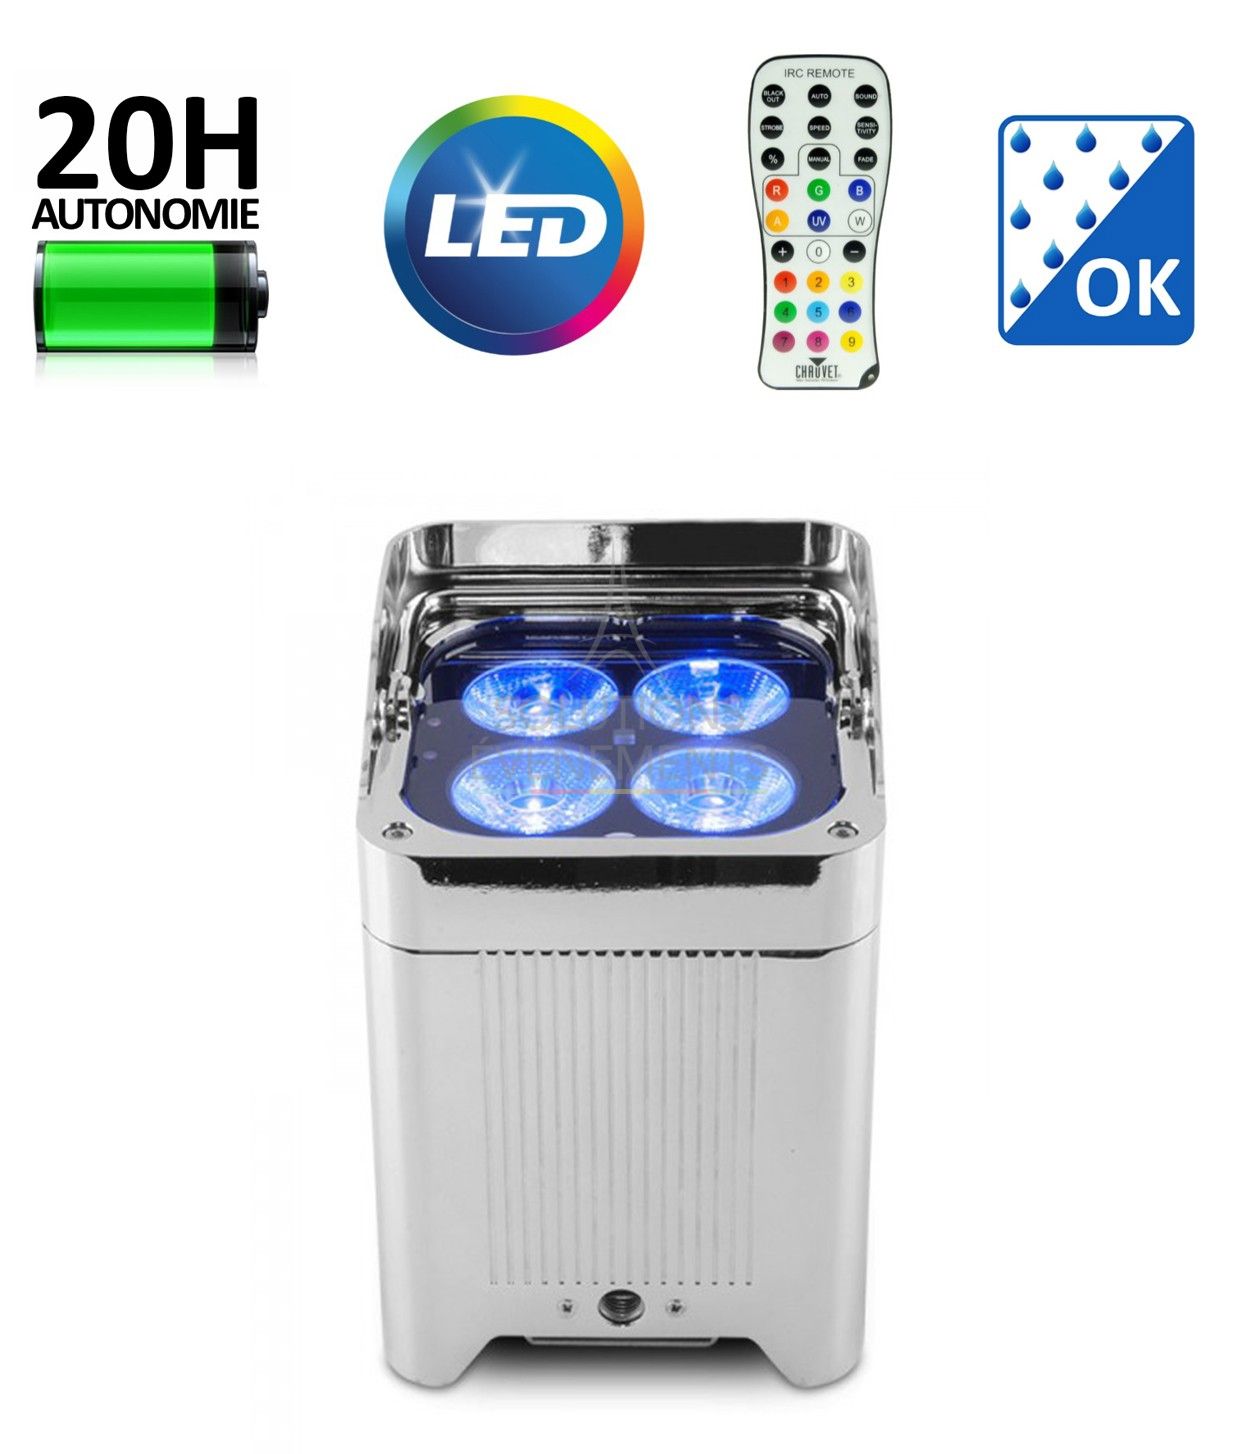 Rental of LED projectors for outdoor lighting